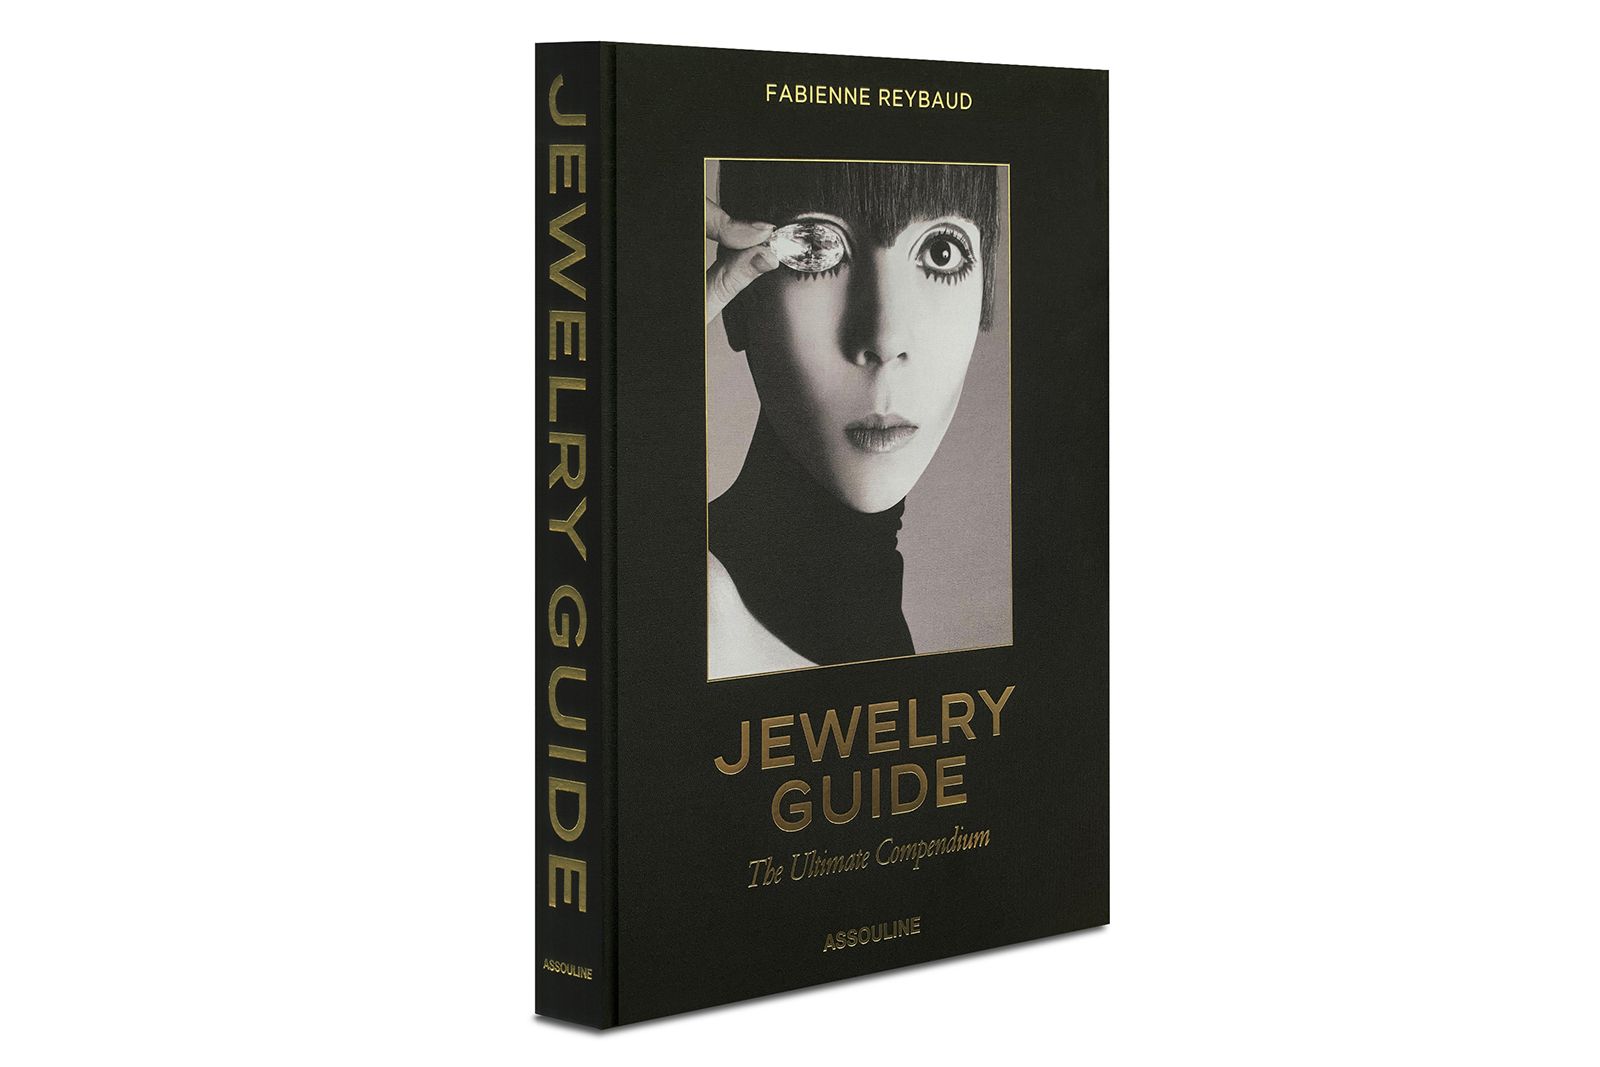 Jewelry Guide -The Ultimate Compendium by Fabienne Reybaud and published by Assouline